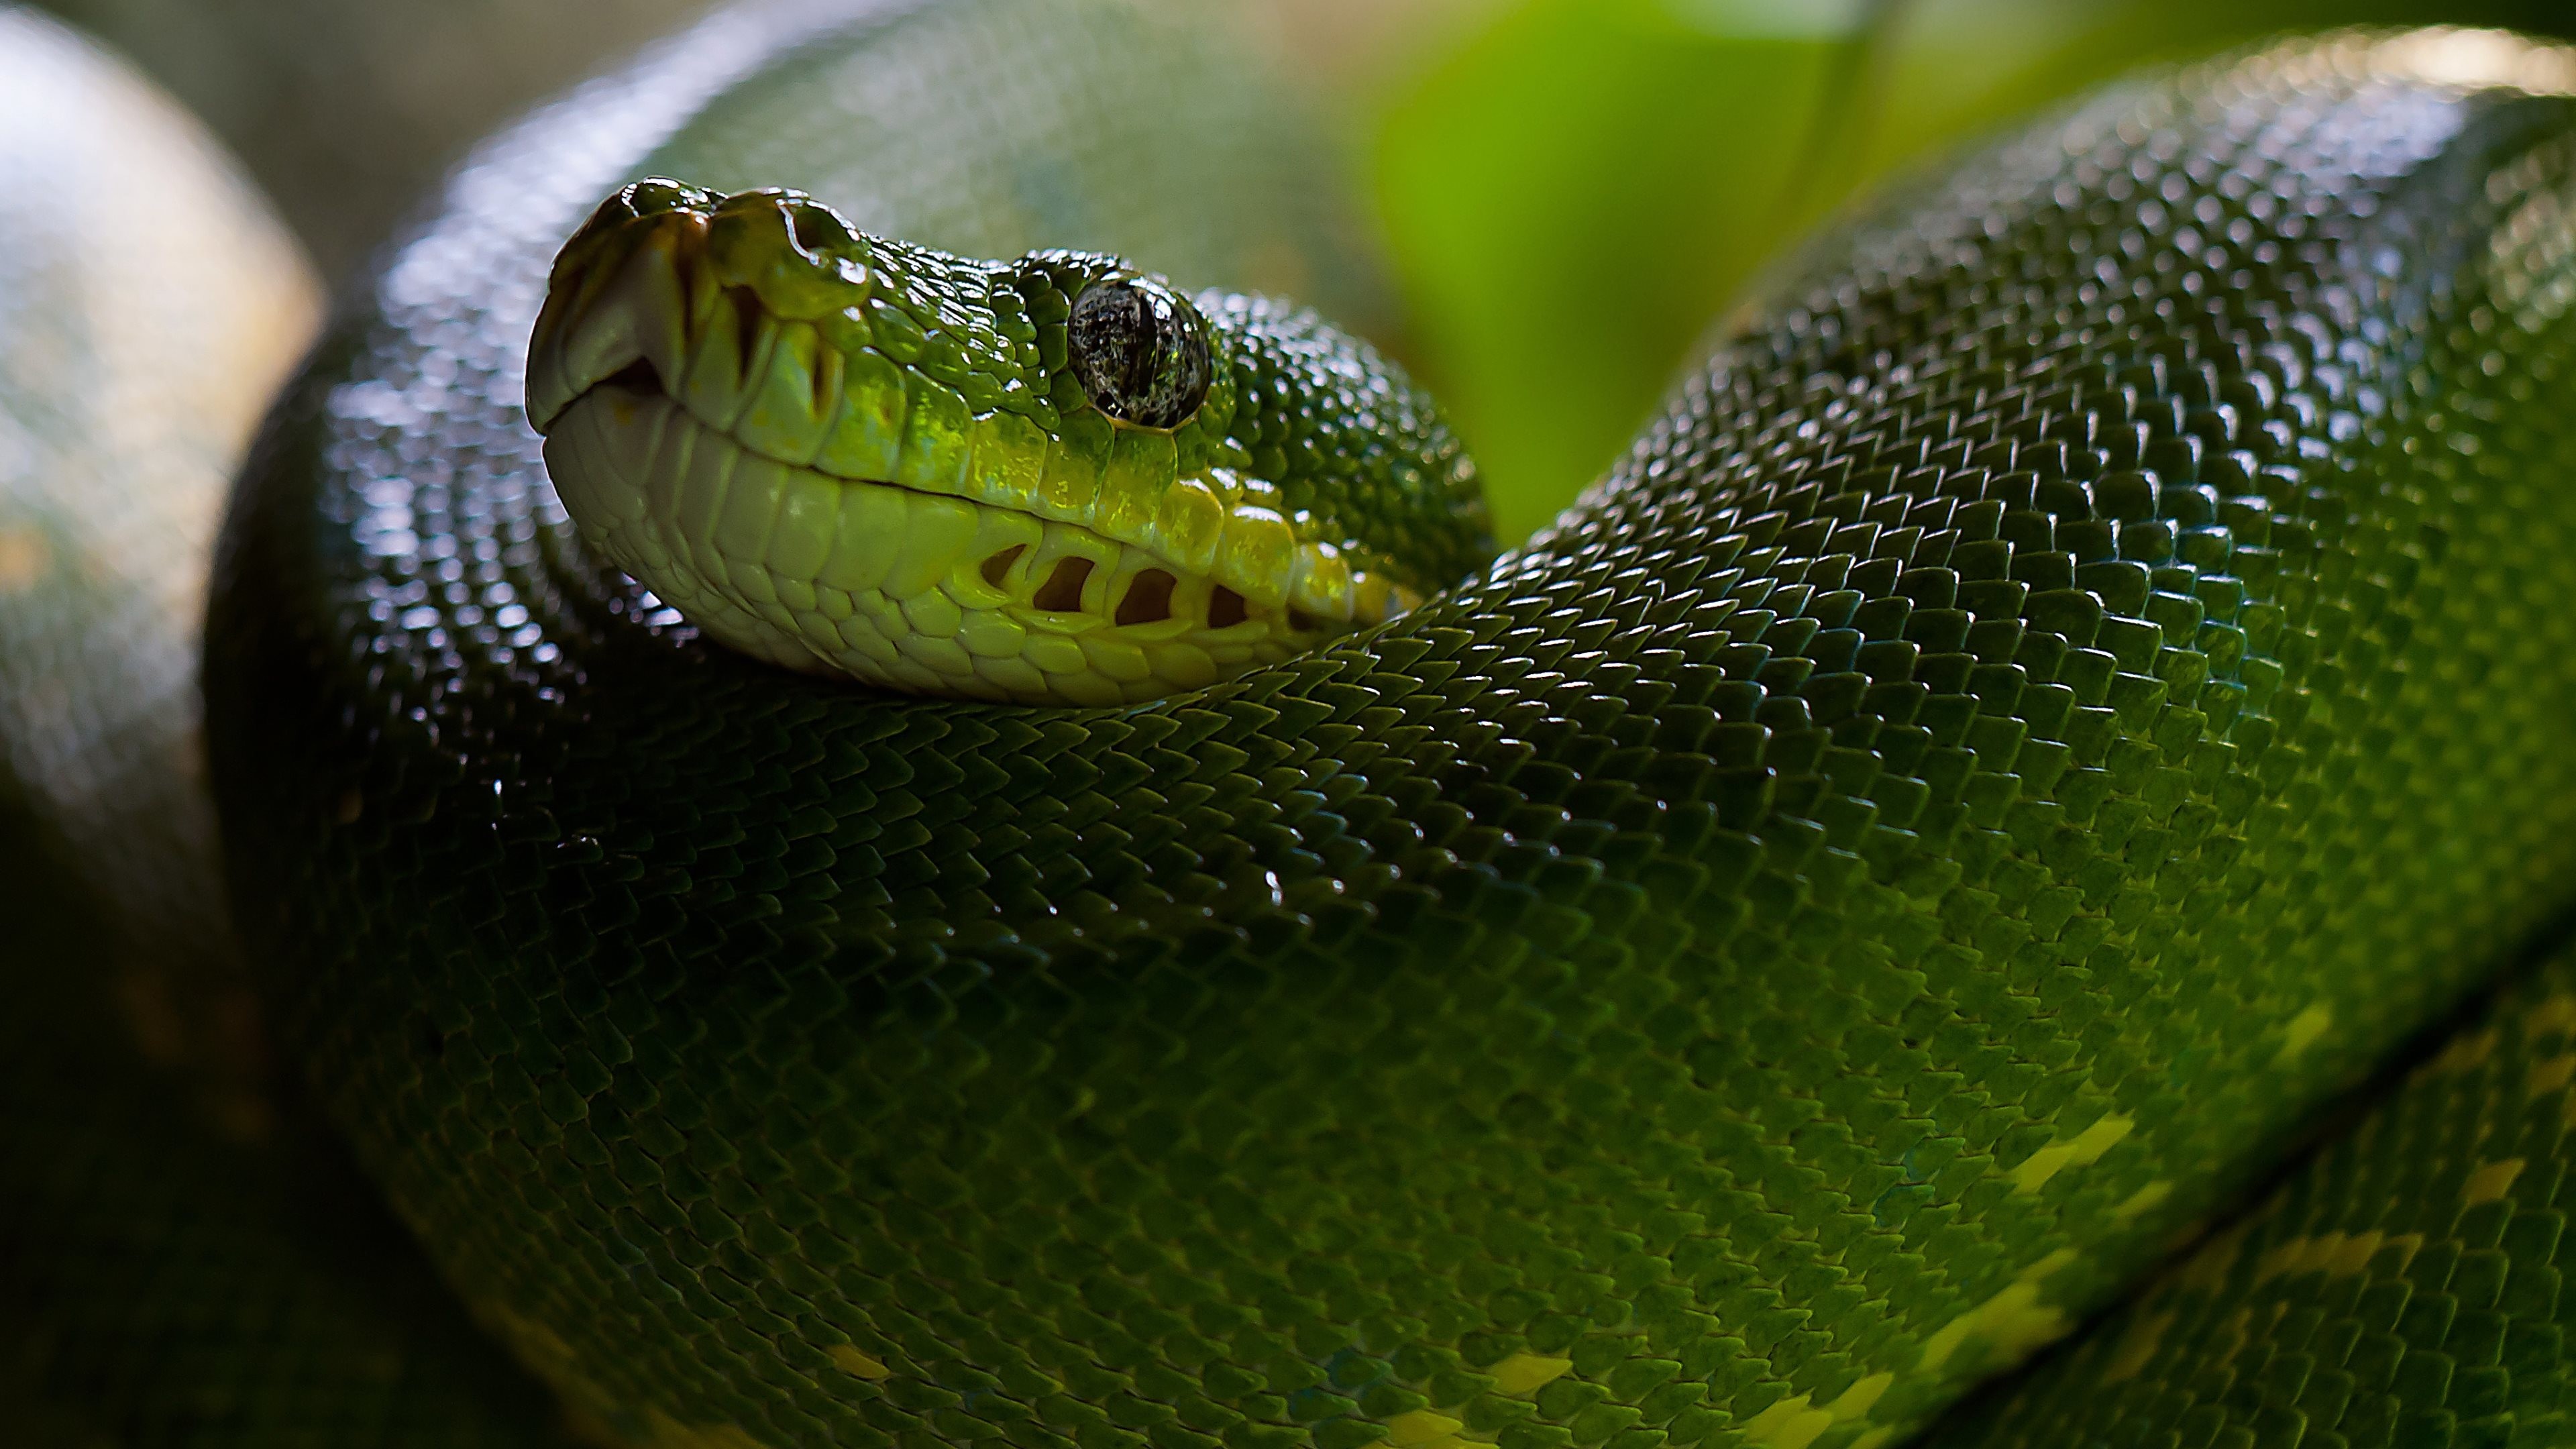 3840x2160 wallpaper.wiki-Viper-Snake-Images-PIC-WPE009017